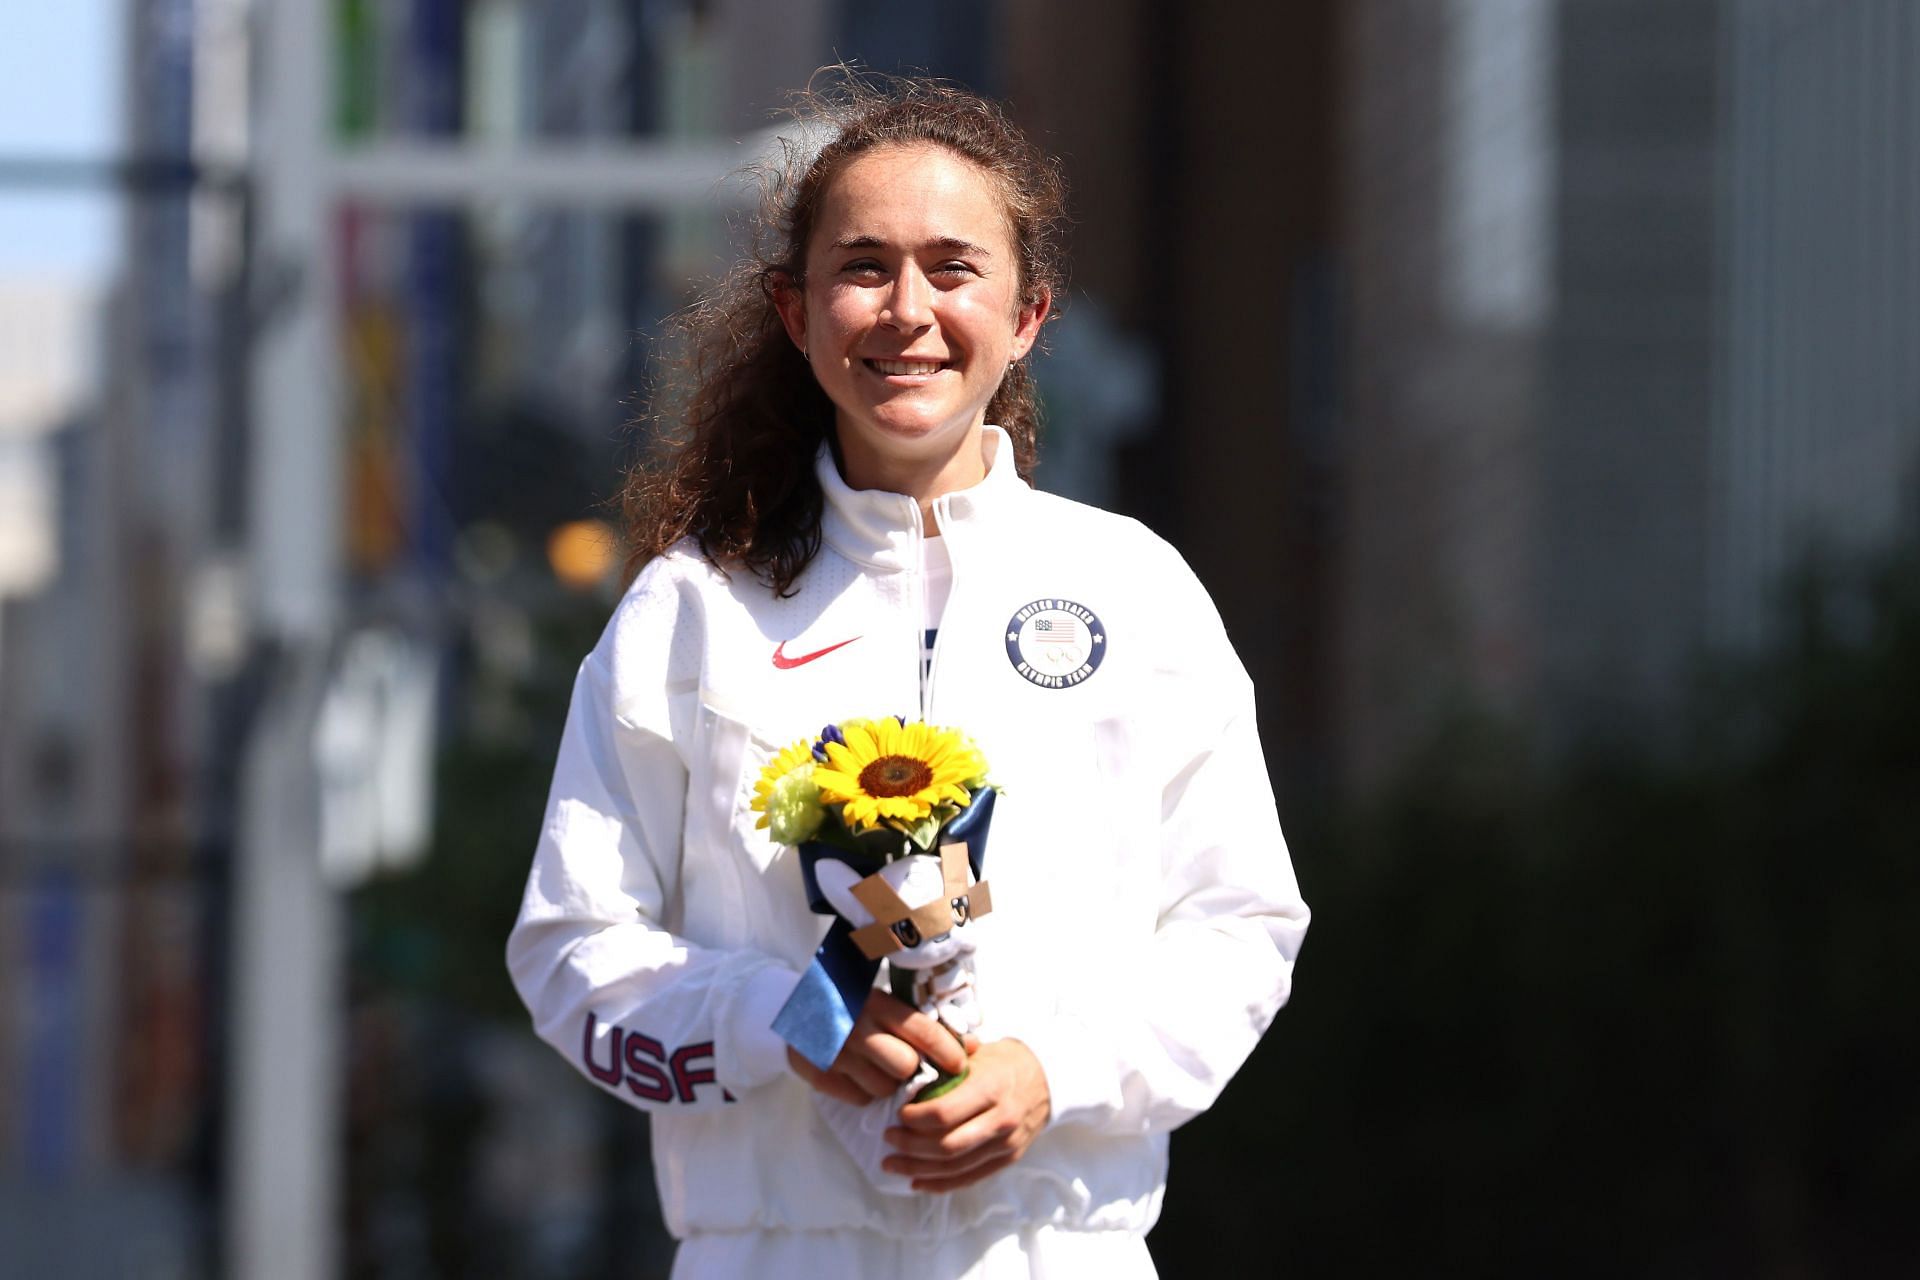 Molly Seidel poses for a photo during the flower ceremony for the Women&#039;s Marathon Final at the 2020 Olympic Games in Sapporo, Japan.